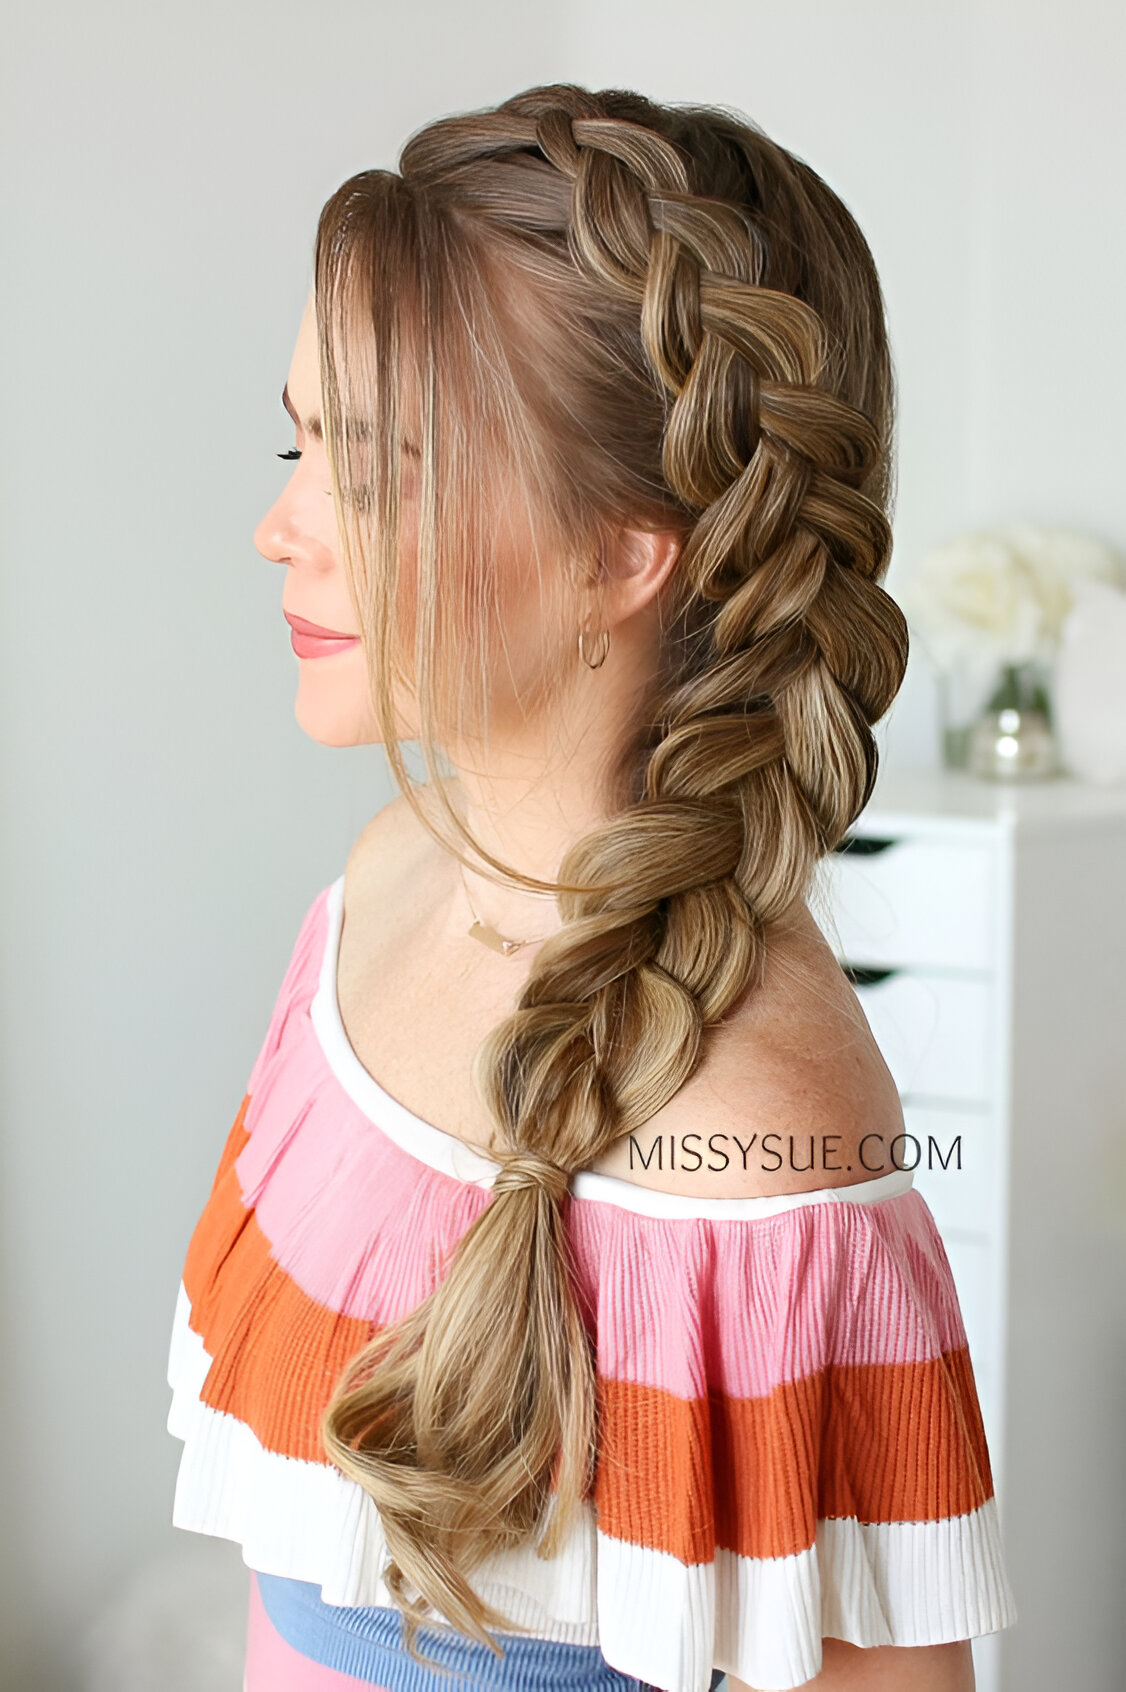 Casual Hairstyles With Side Braid 2